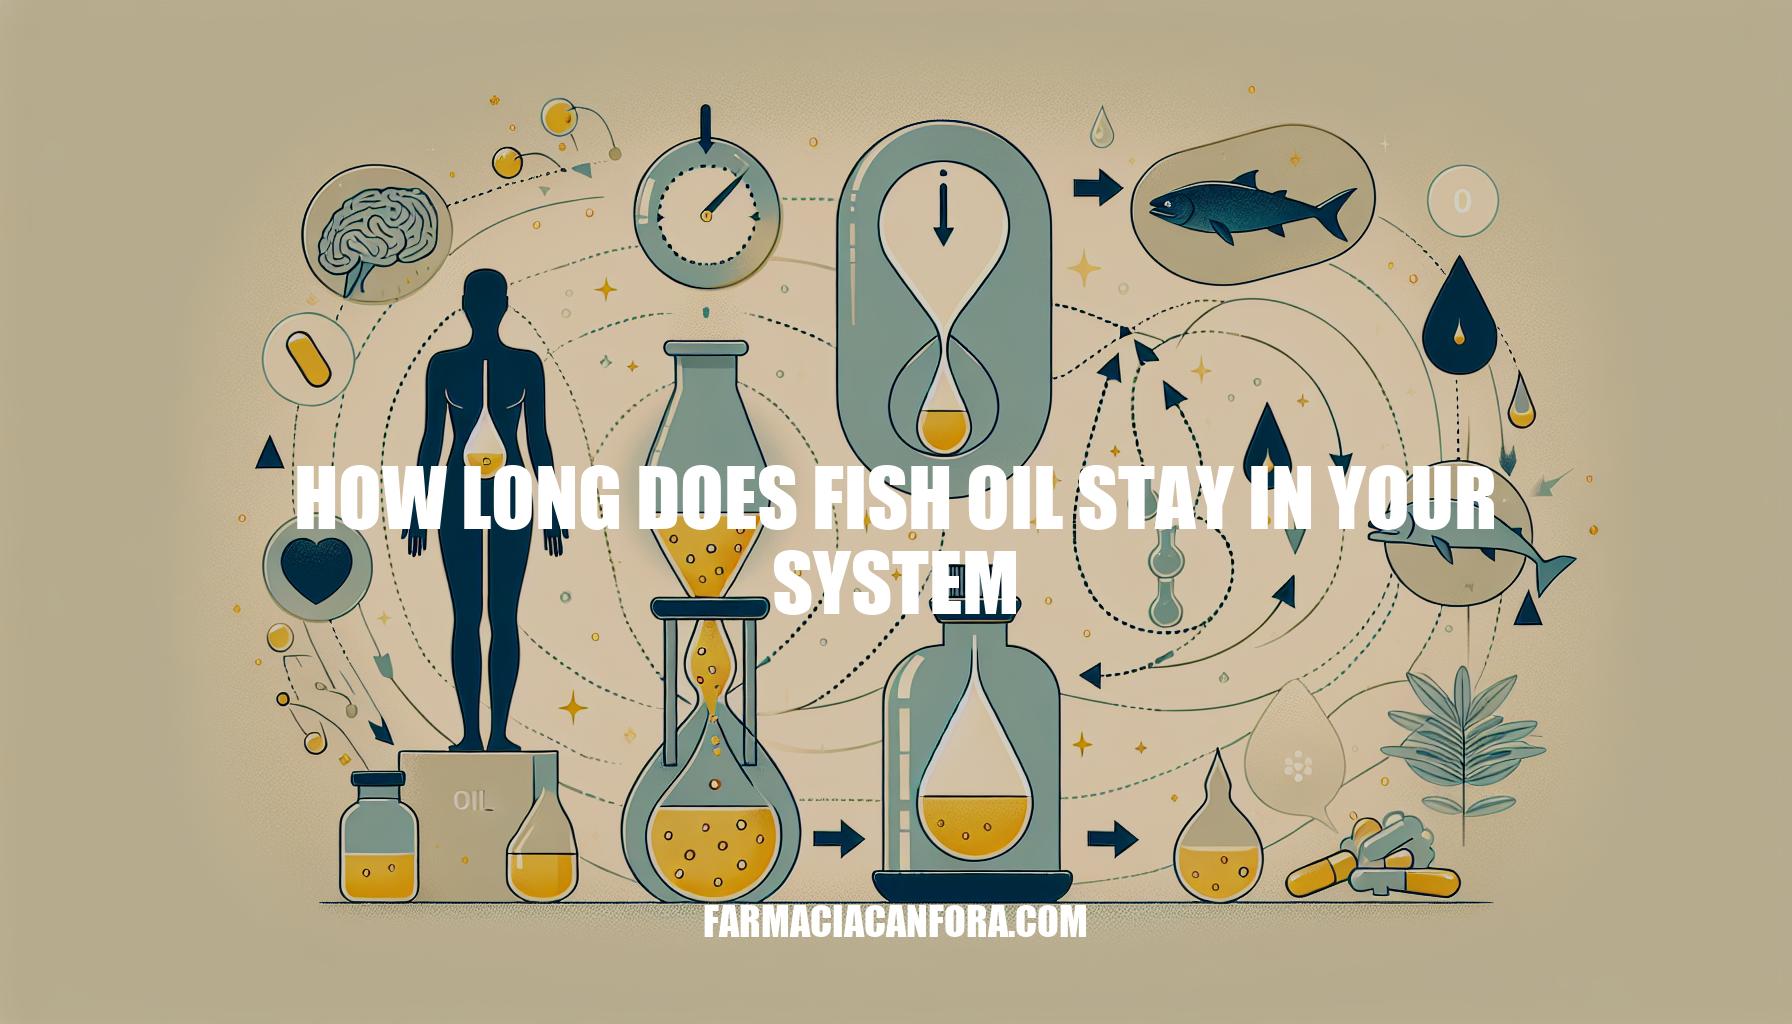 How Long Does Fish Oil Stay in Your System